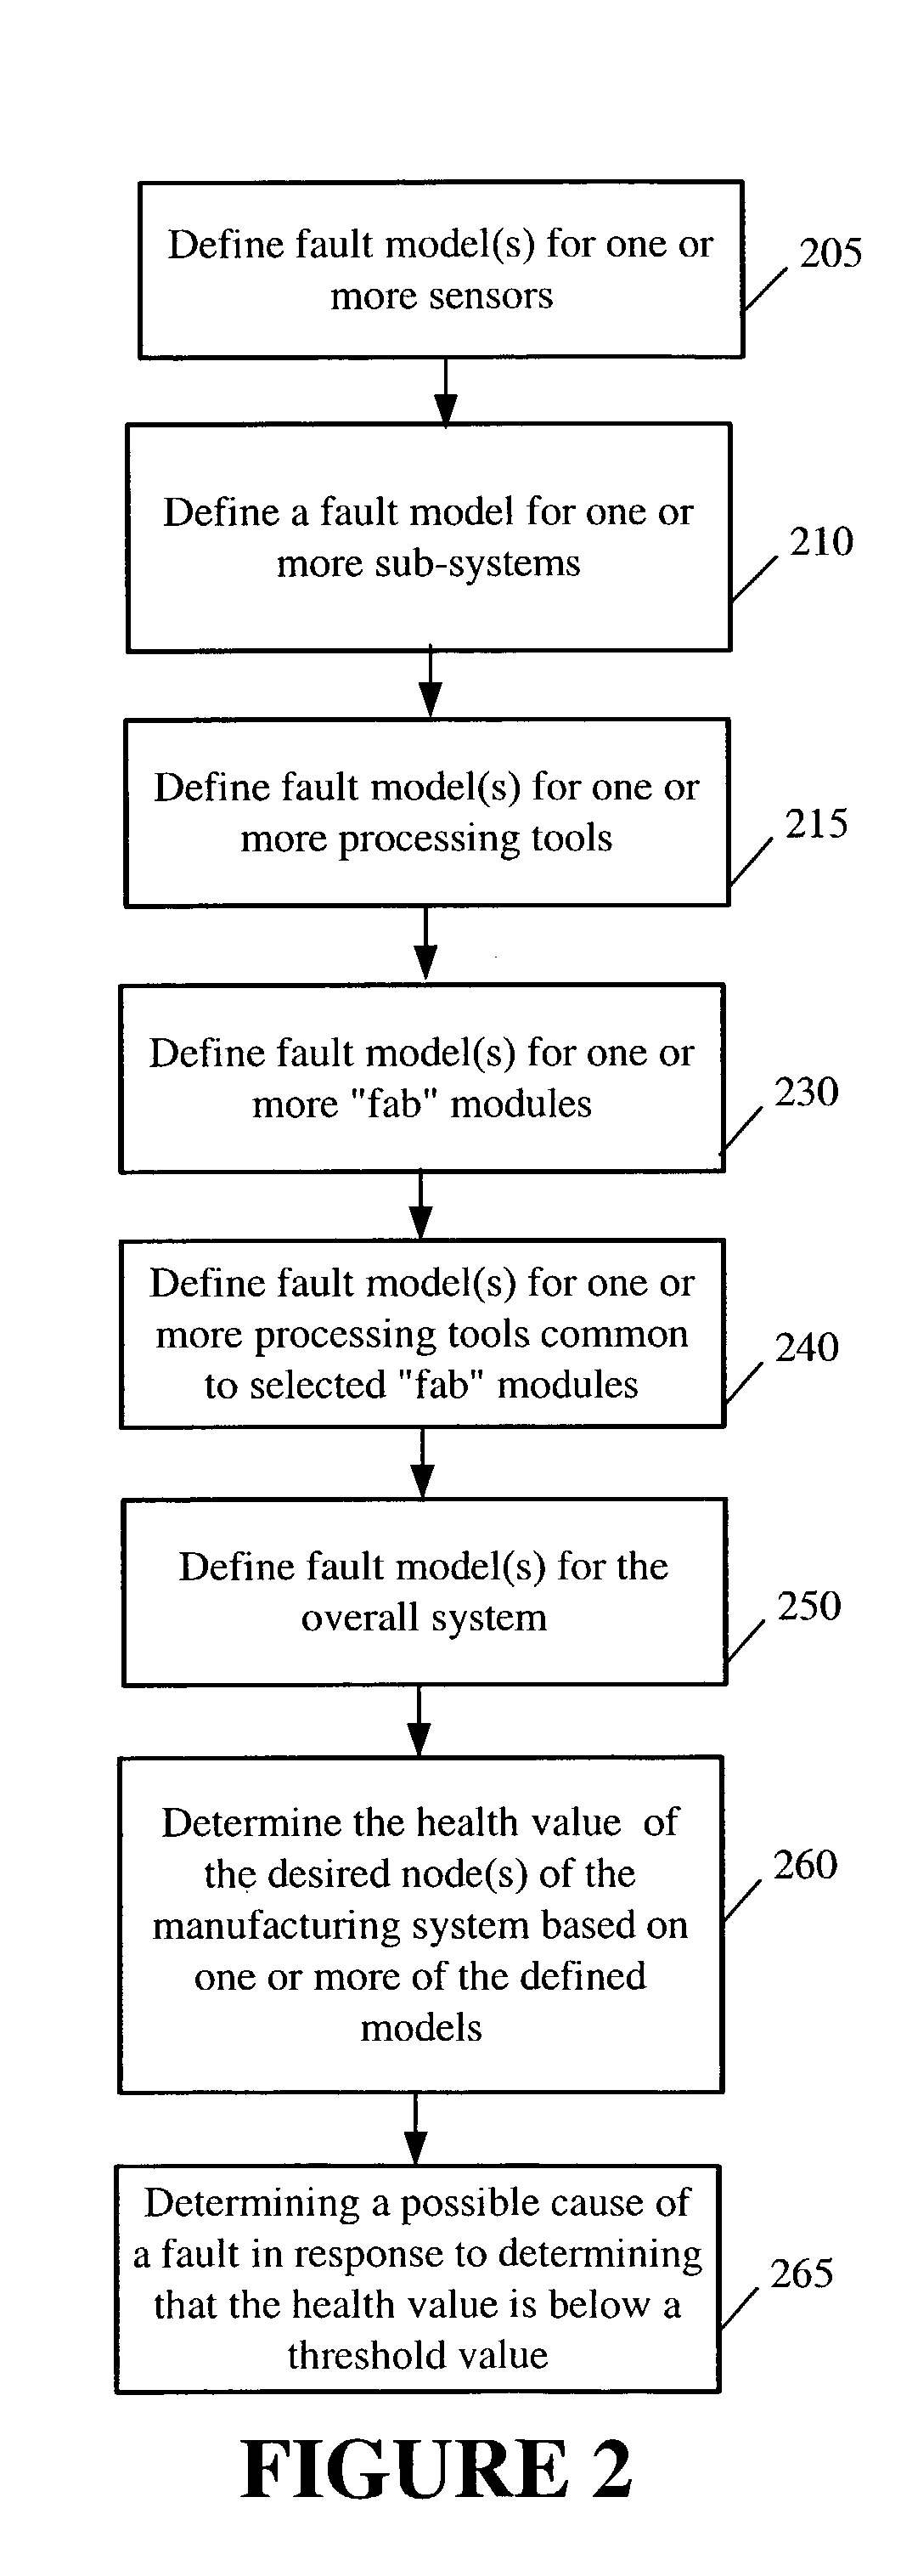 Determining the health of a desired node in a multi-level system